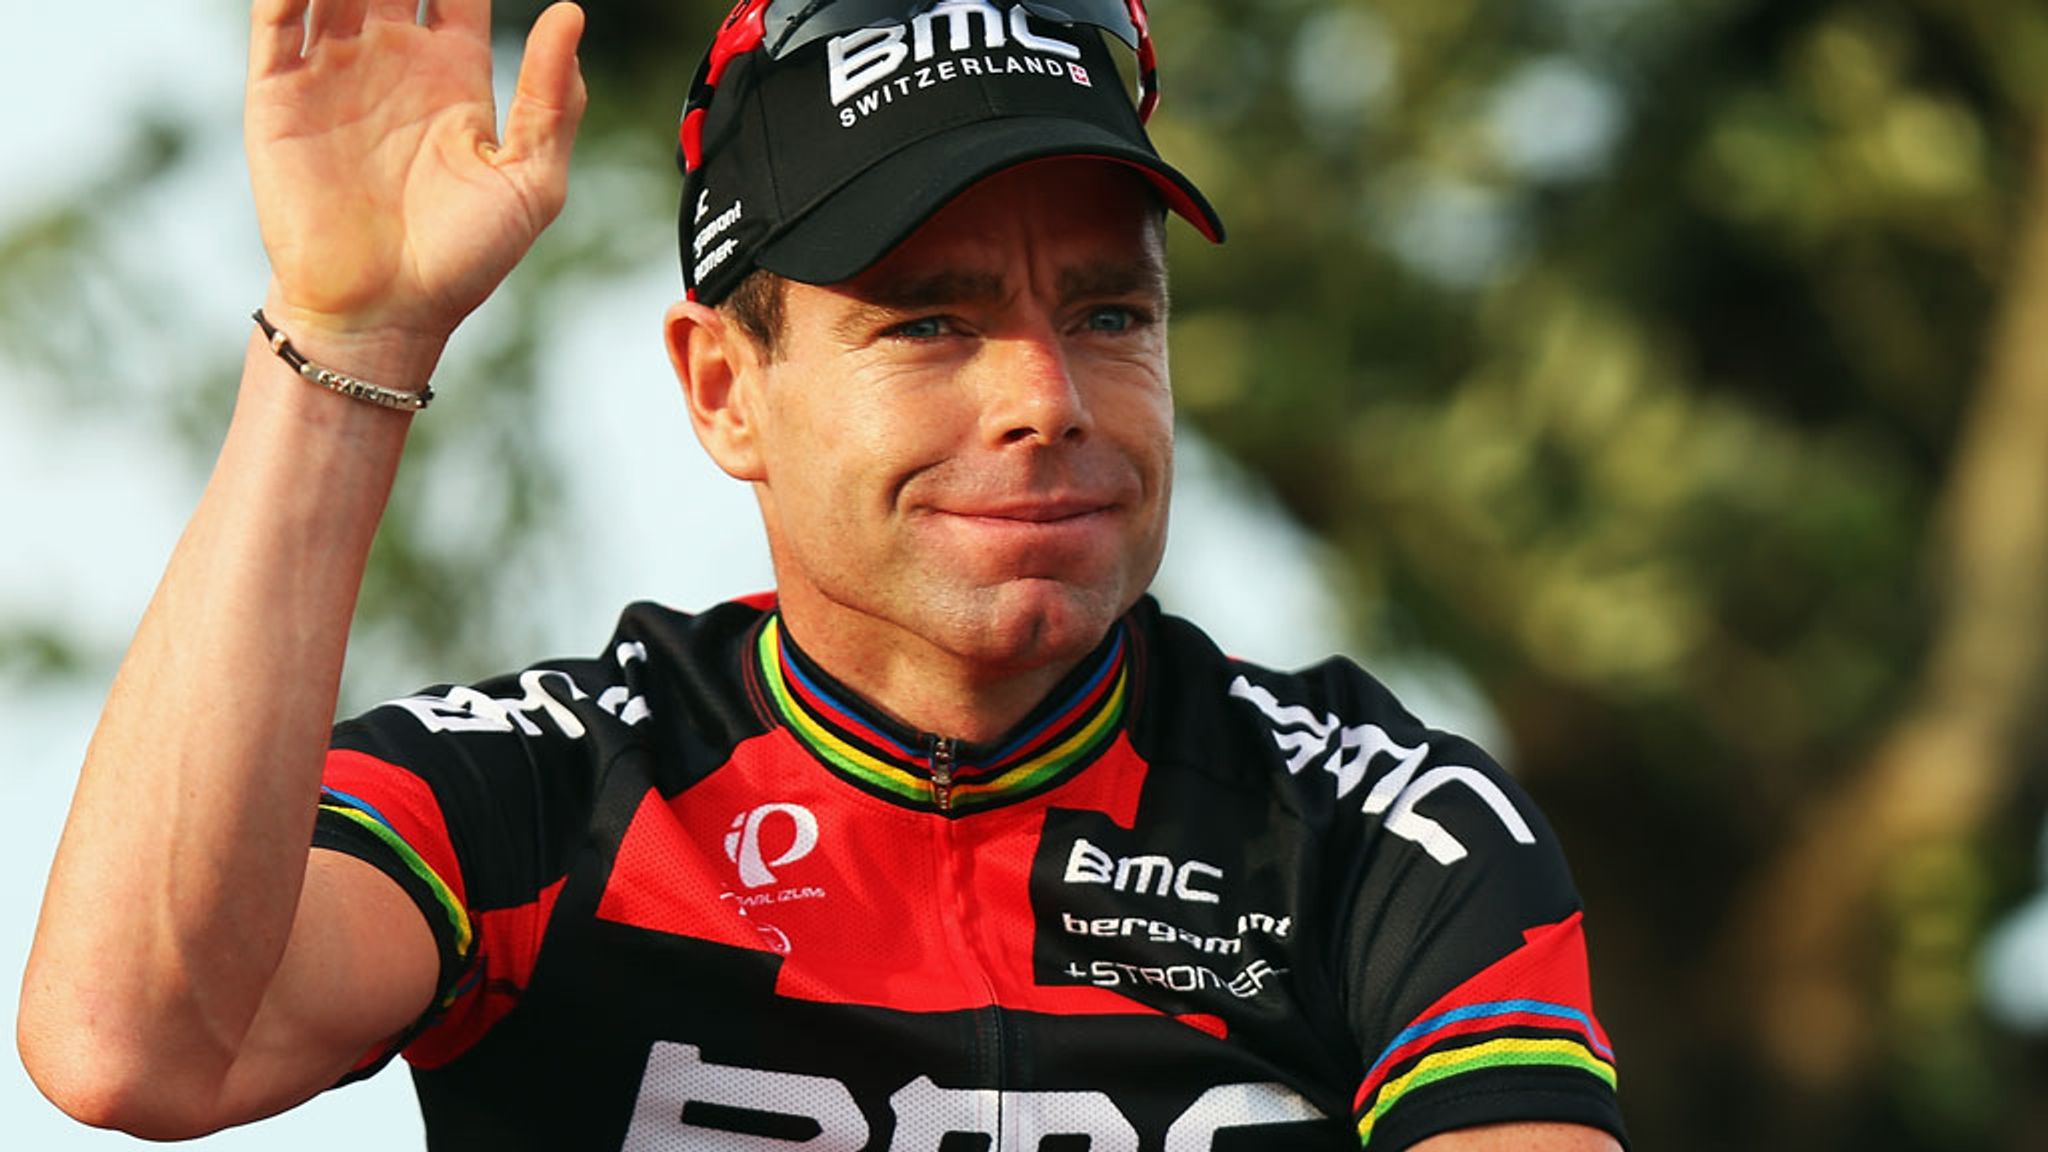 de France: Former champion Cadel Evans happy to be an underdog in 2013 | Cycling News | Sports